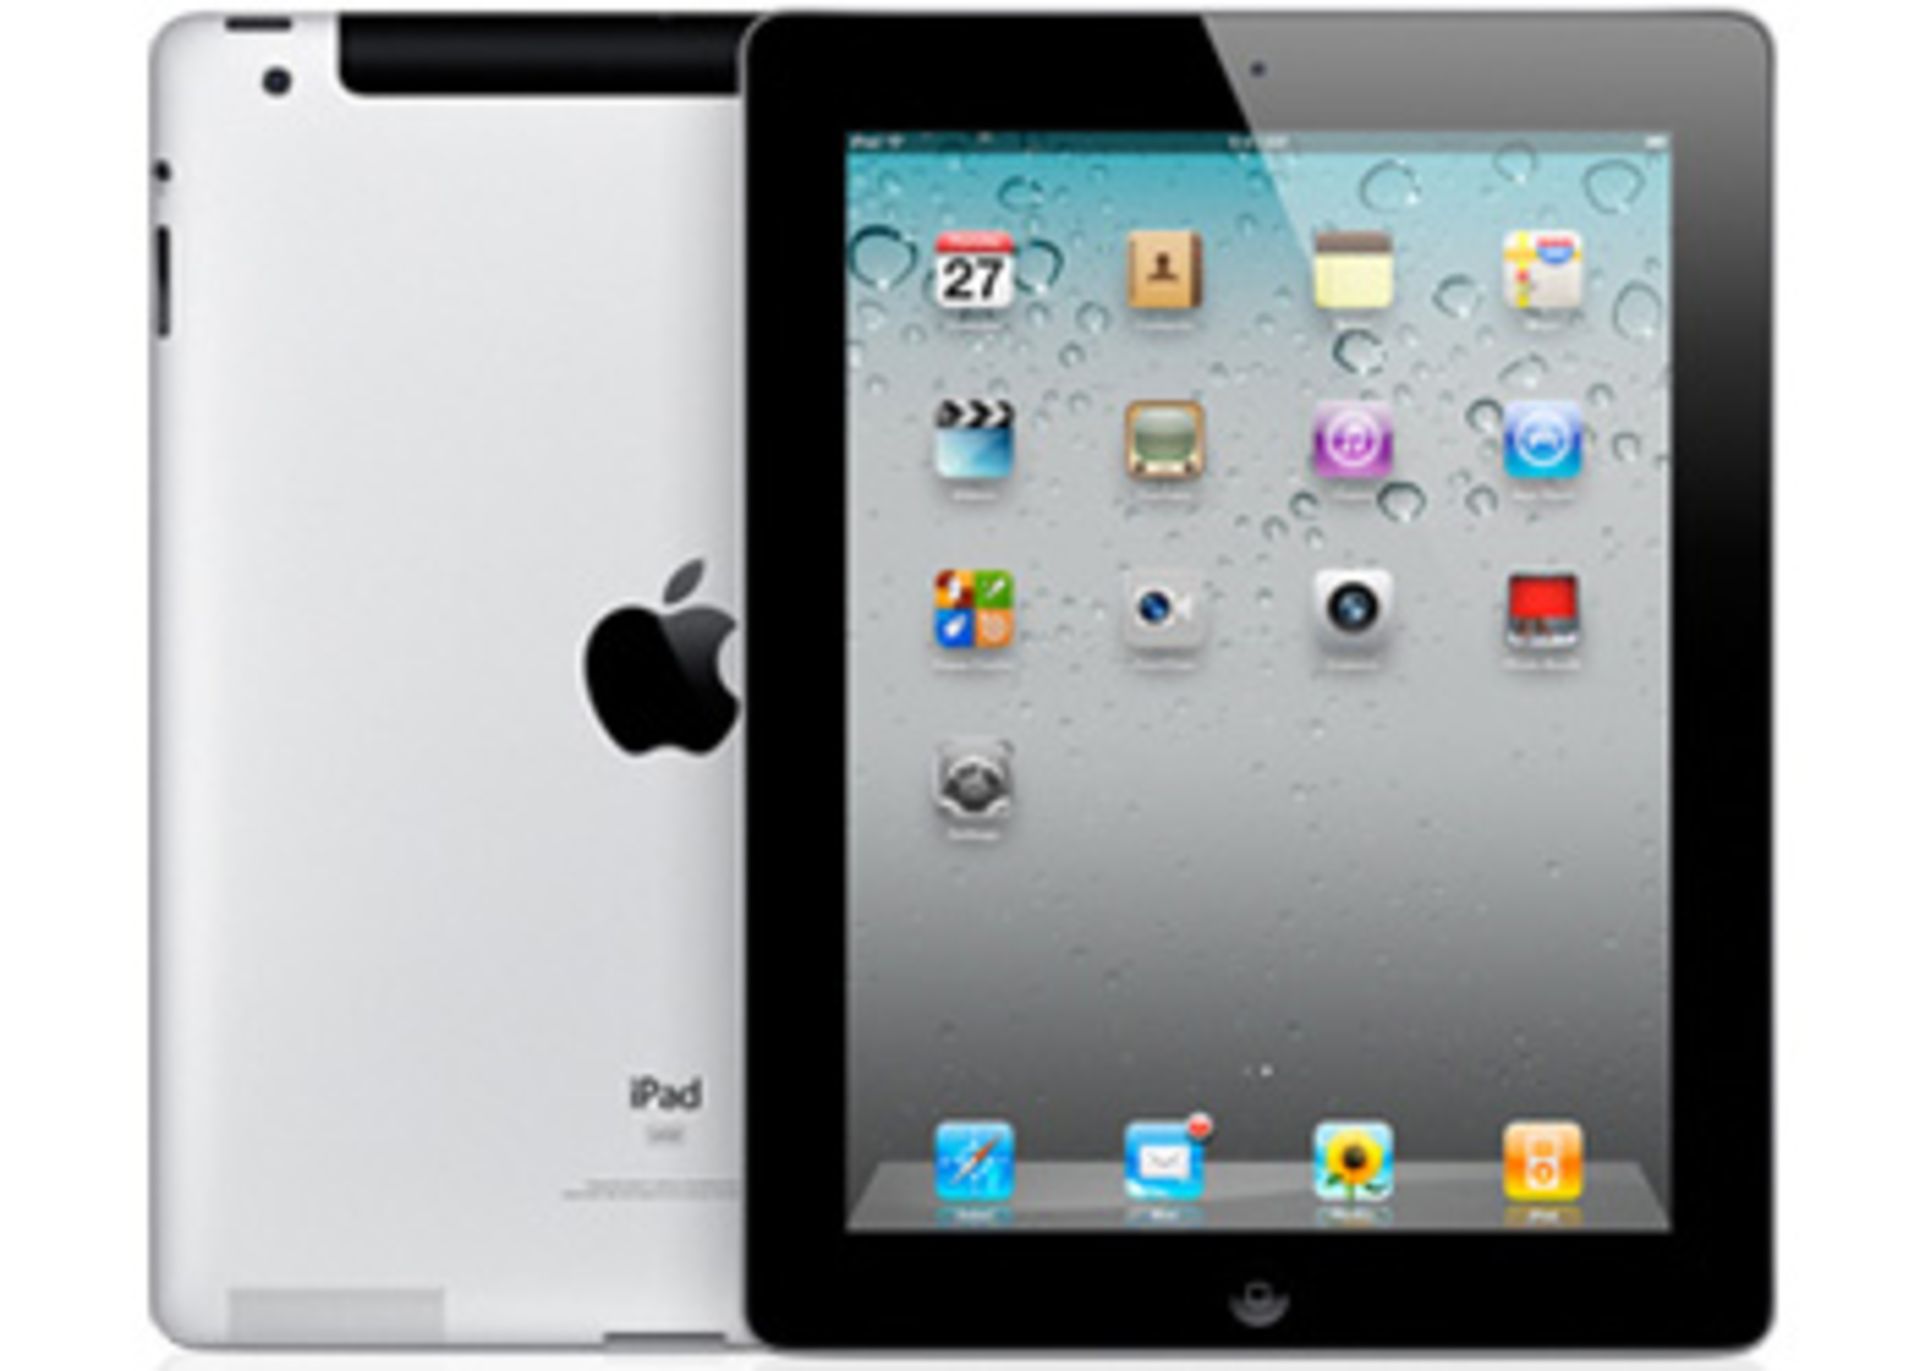 V Grade A Apple iPAD 2 16GB WiFi Front And Rear Facing Cameras Boxed With Accessories Including